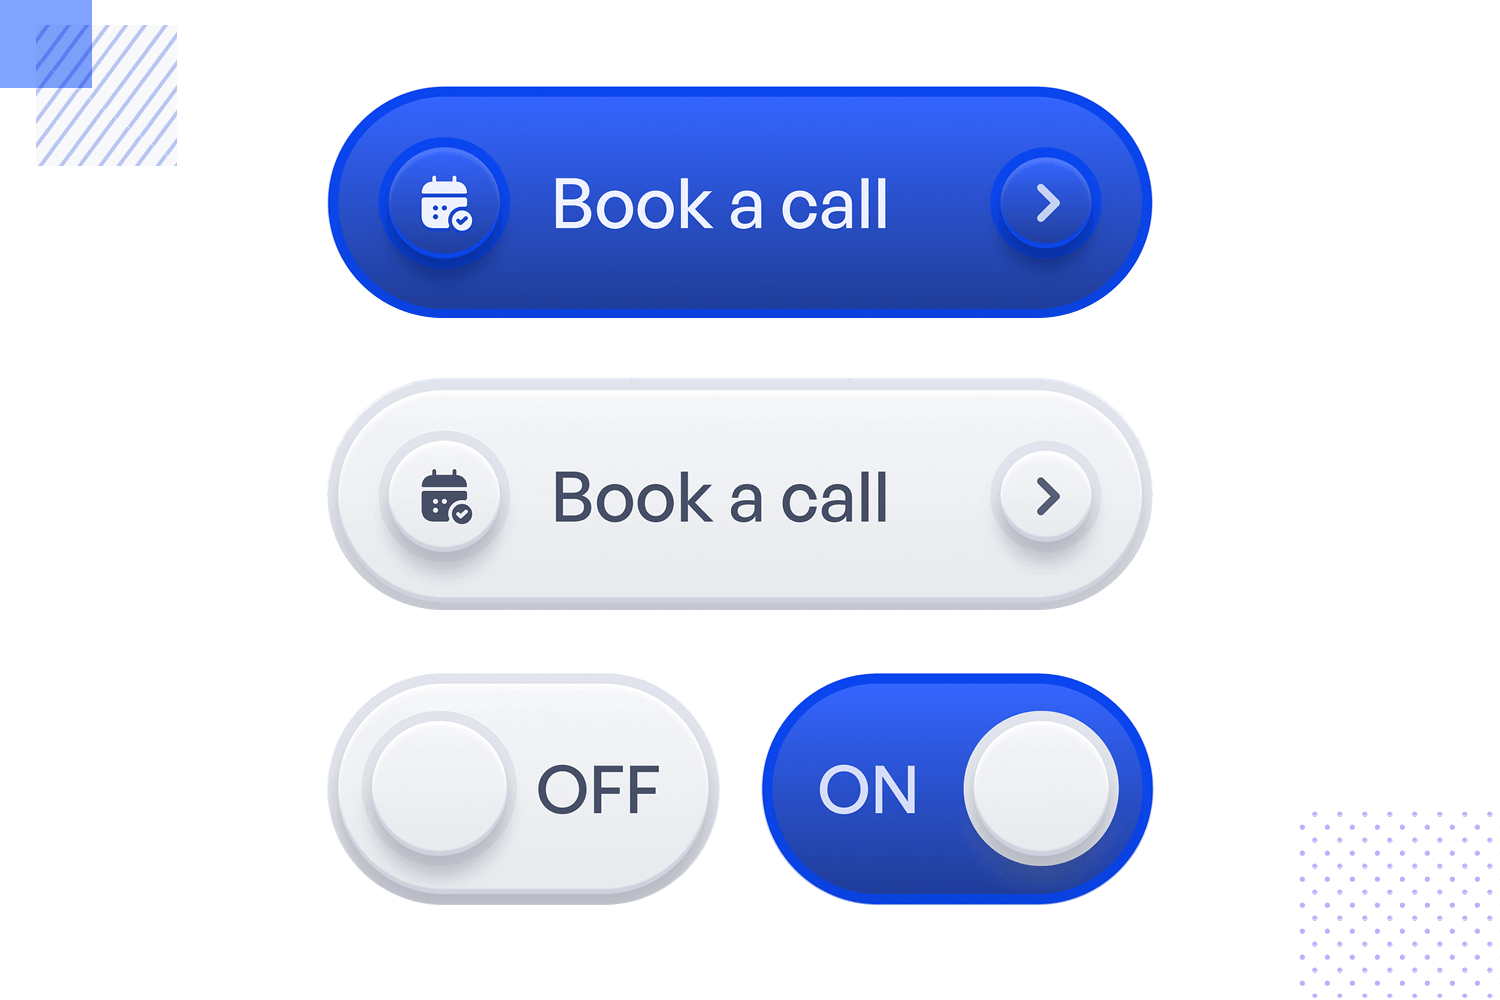 Blue and white 'Book a call' buttons with an ON/OFF toggle